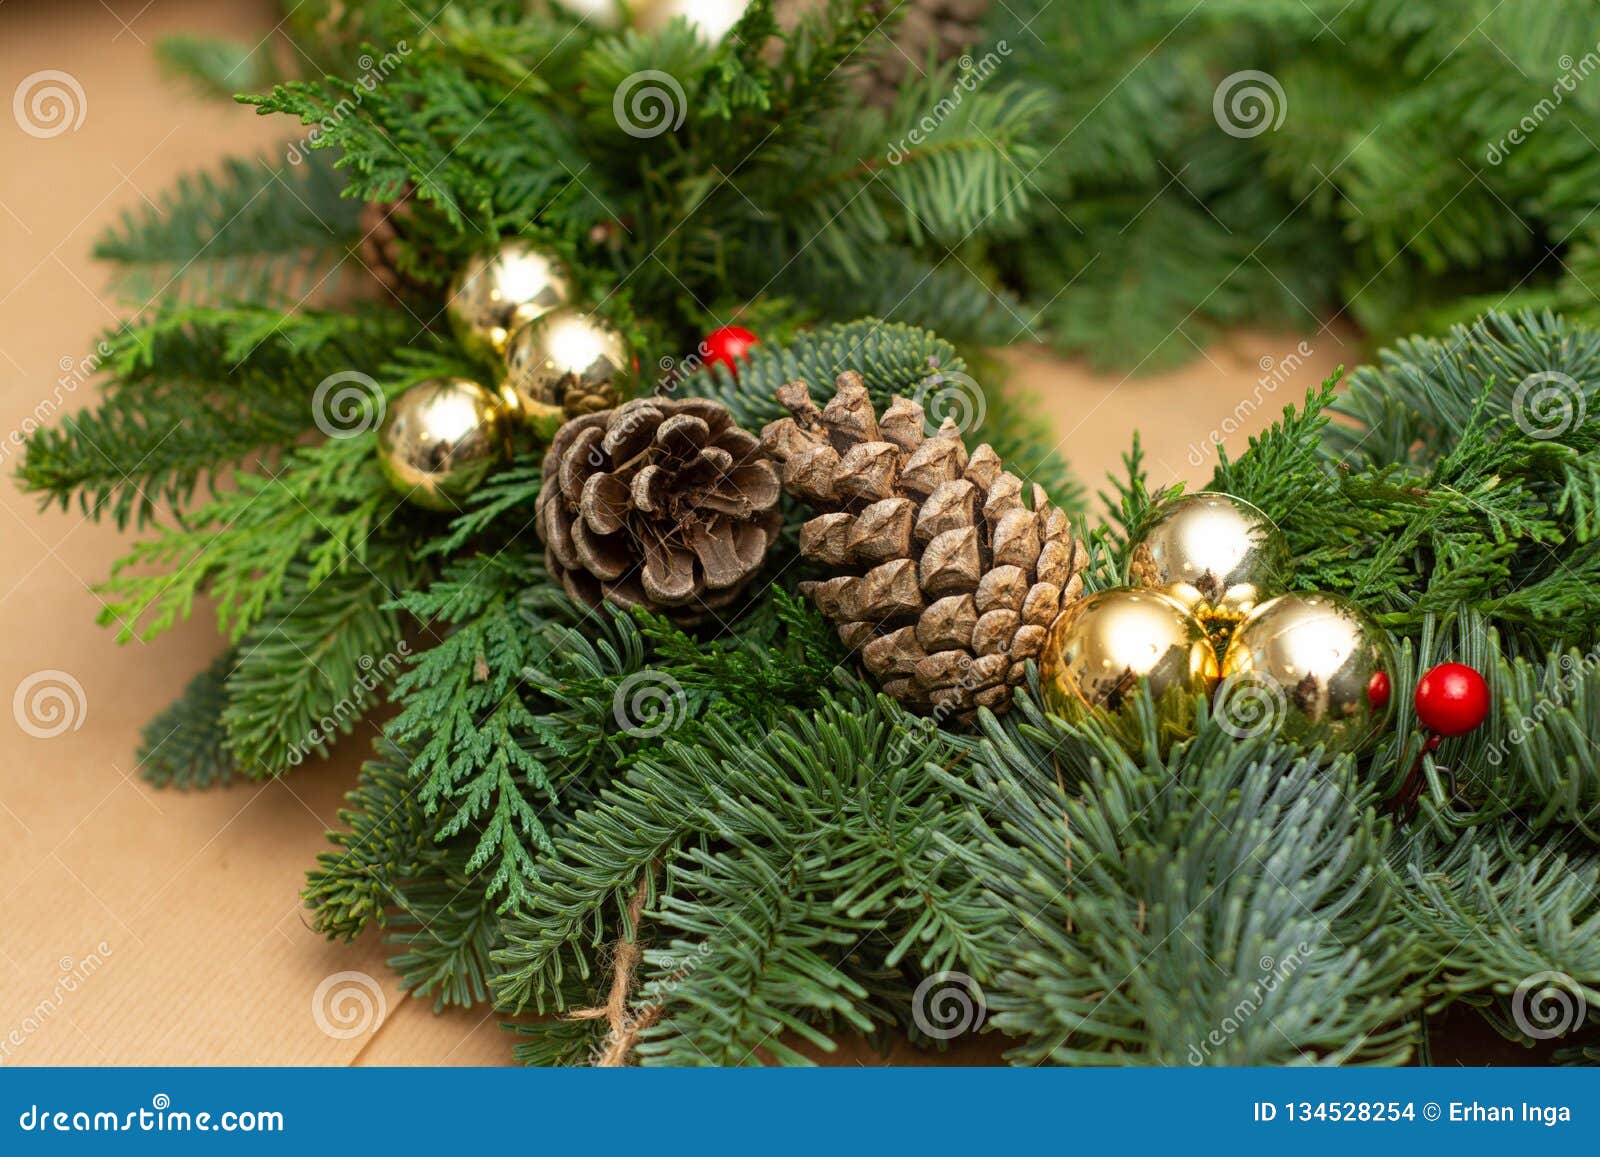 Christmas Natural Wreath with Natural Decorations - Pinecones ...